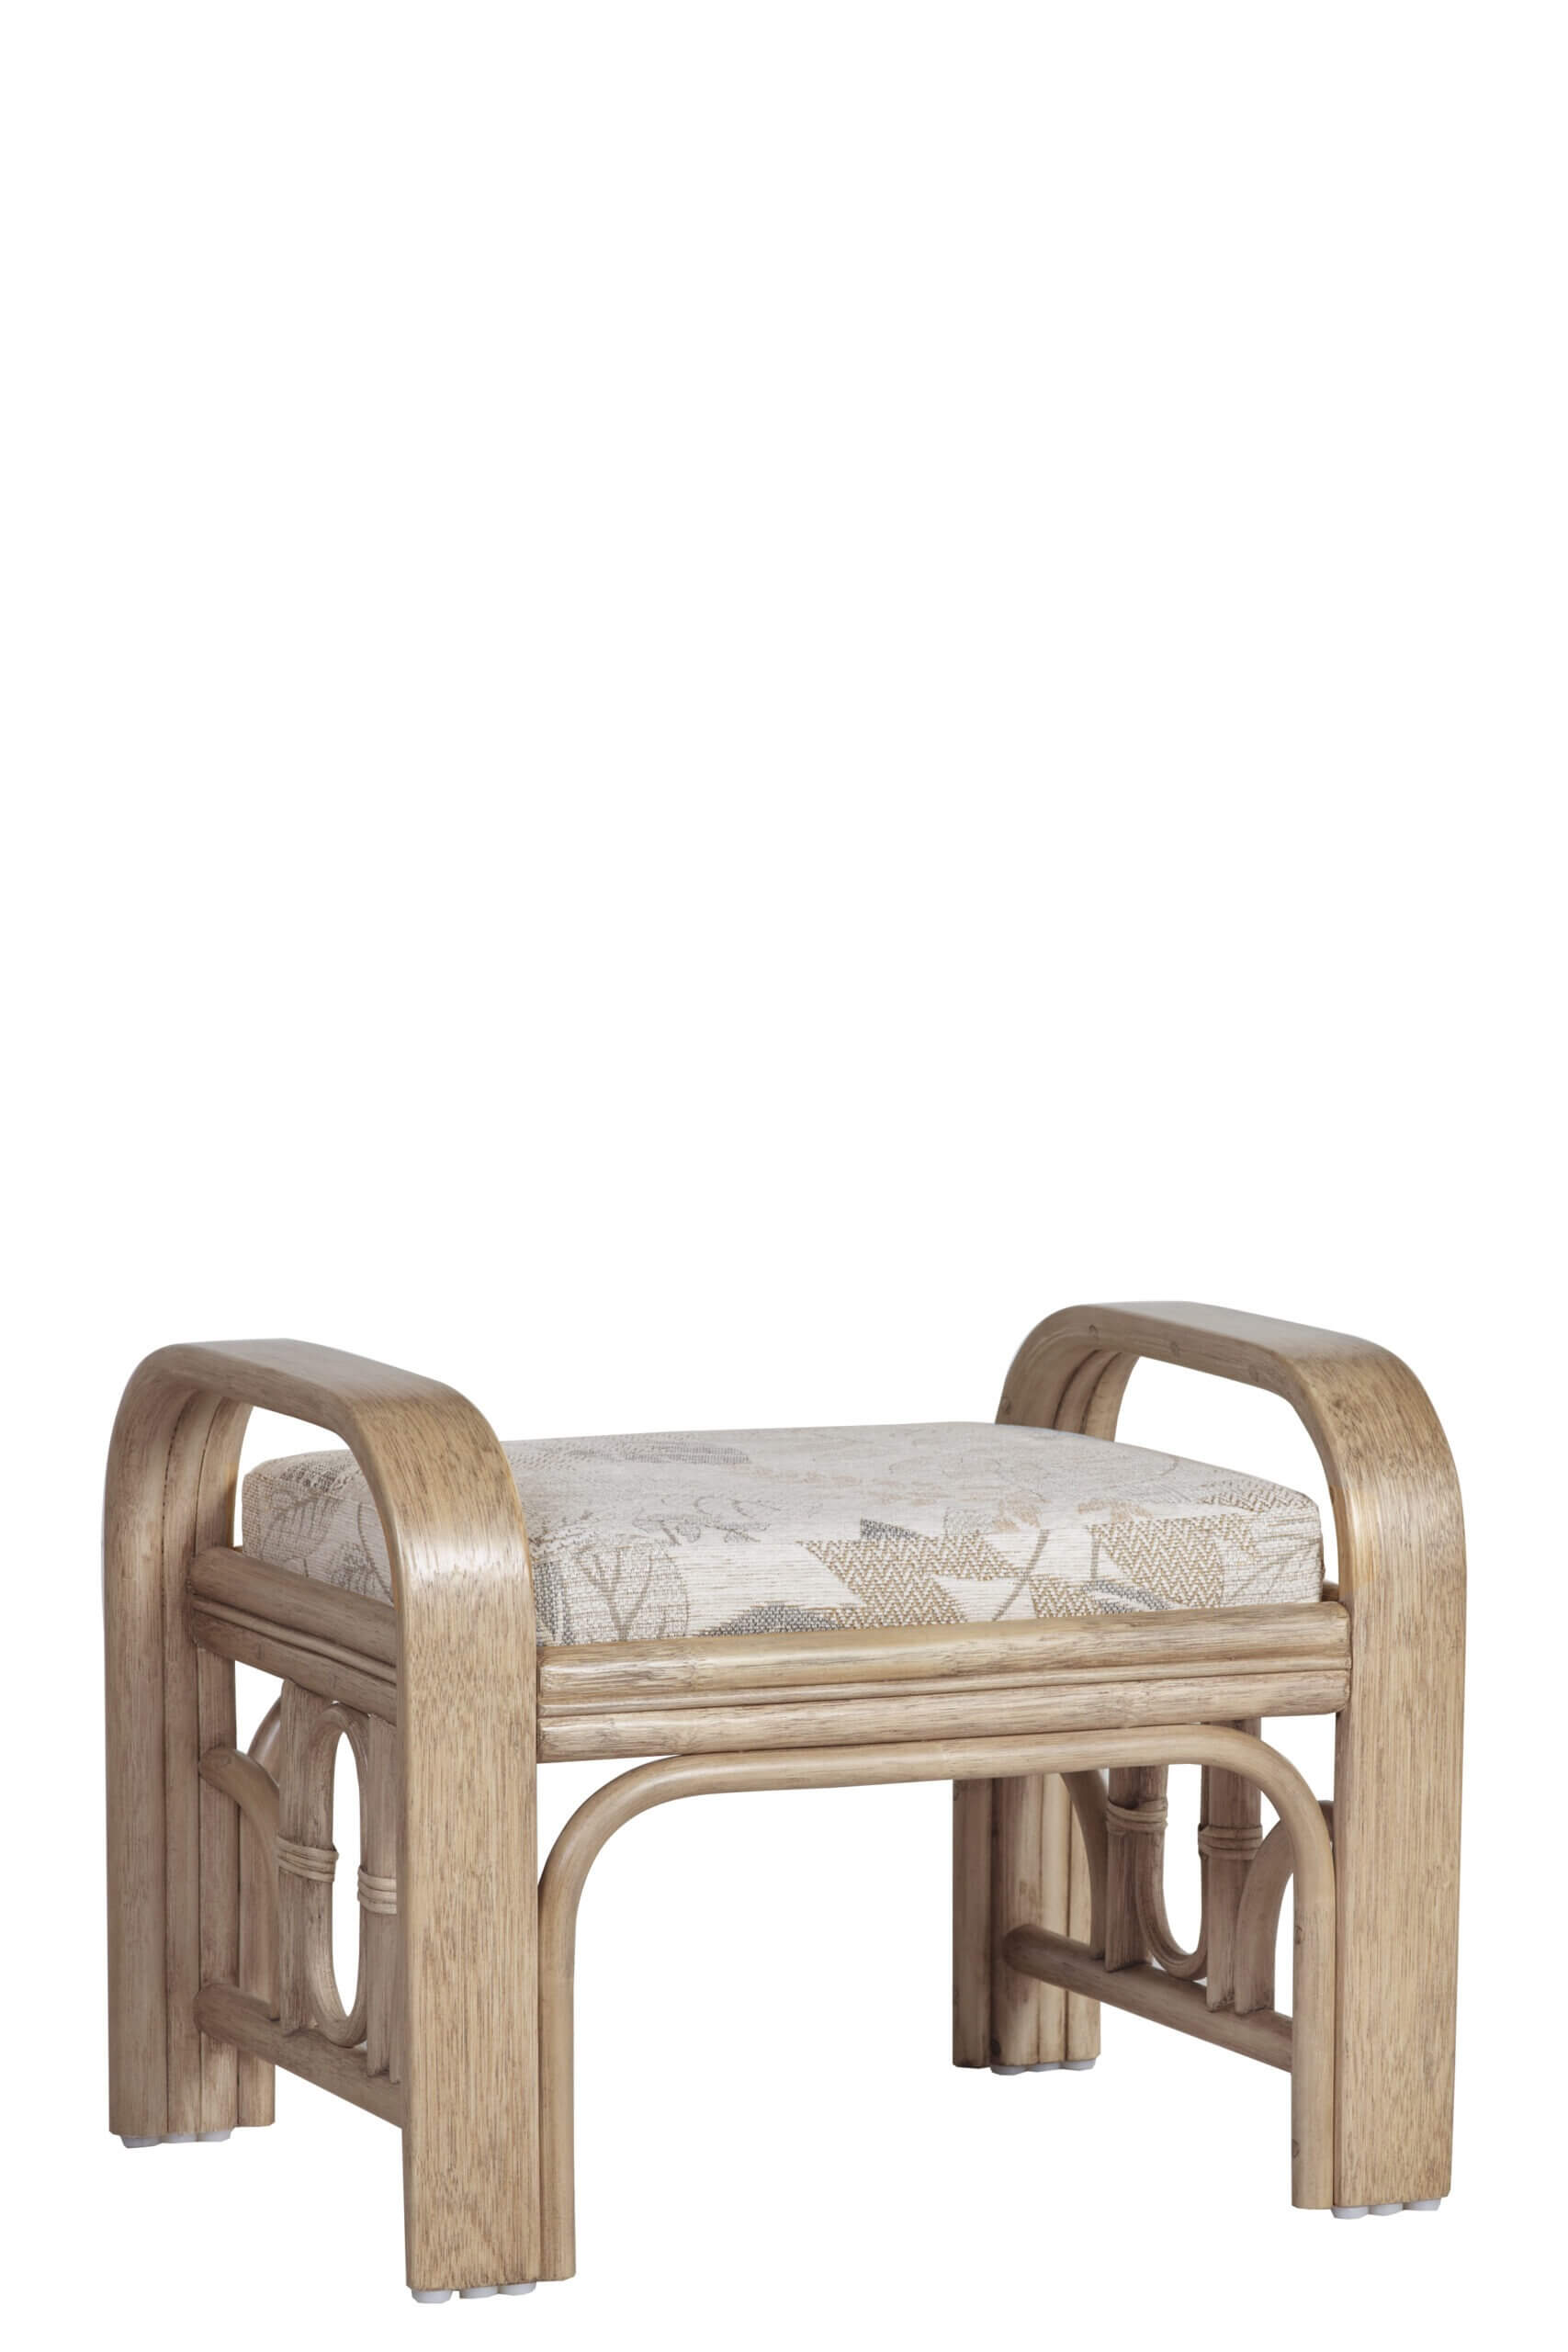 Showing image for Catania footstool